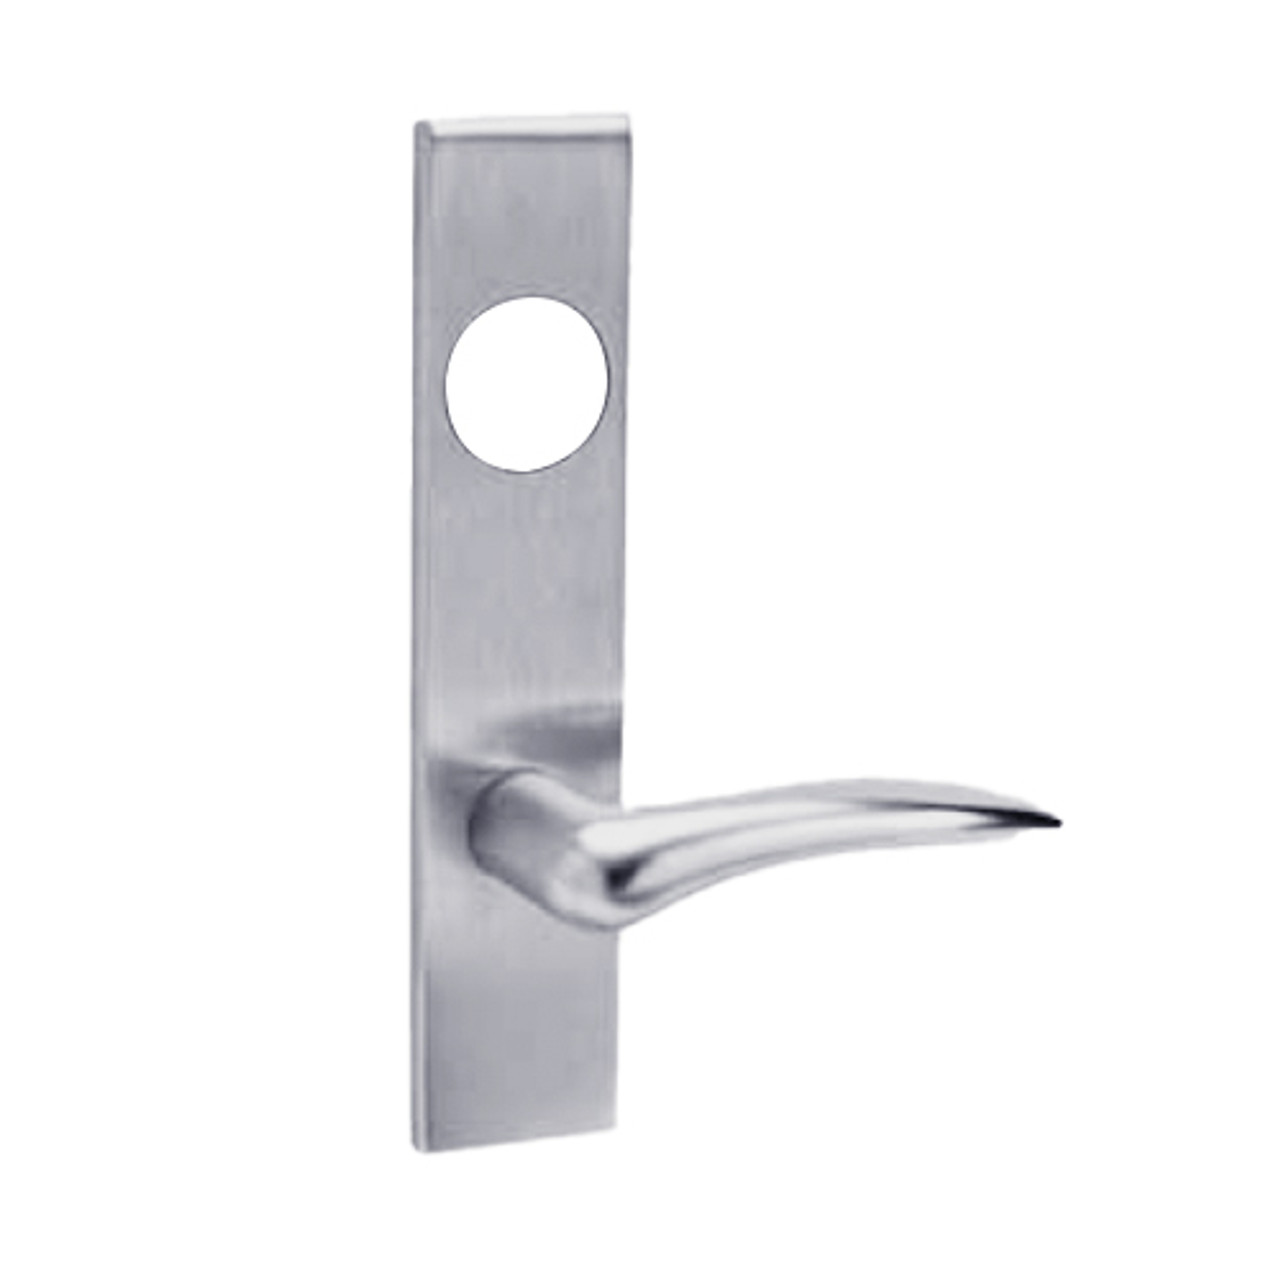 ML2024-DSR-626-LH-M31 Corbin Russwin ML2000 Series Mortise Entrance Trim Pack with Dirke Lever in Satin Chrome